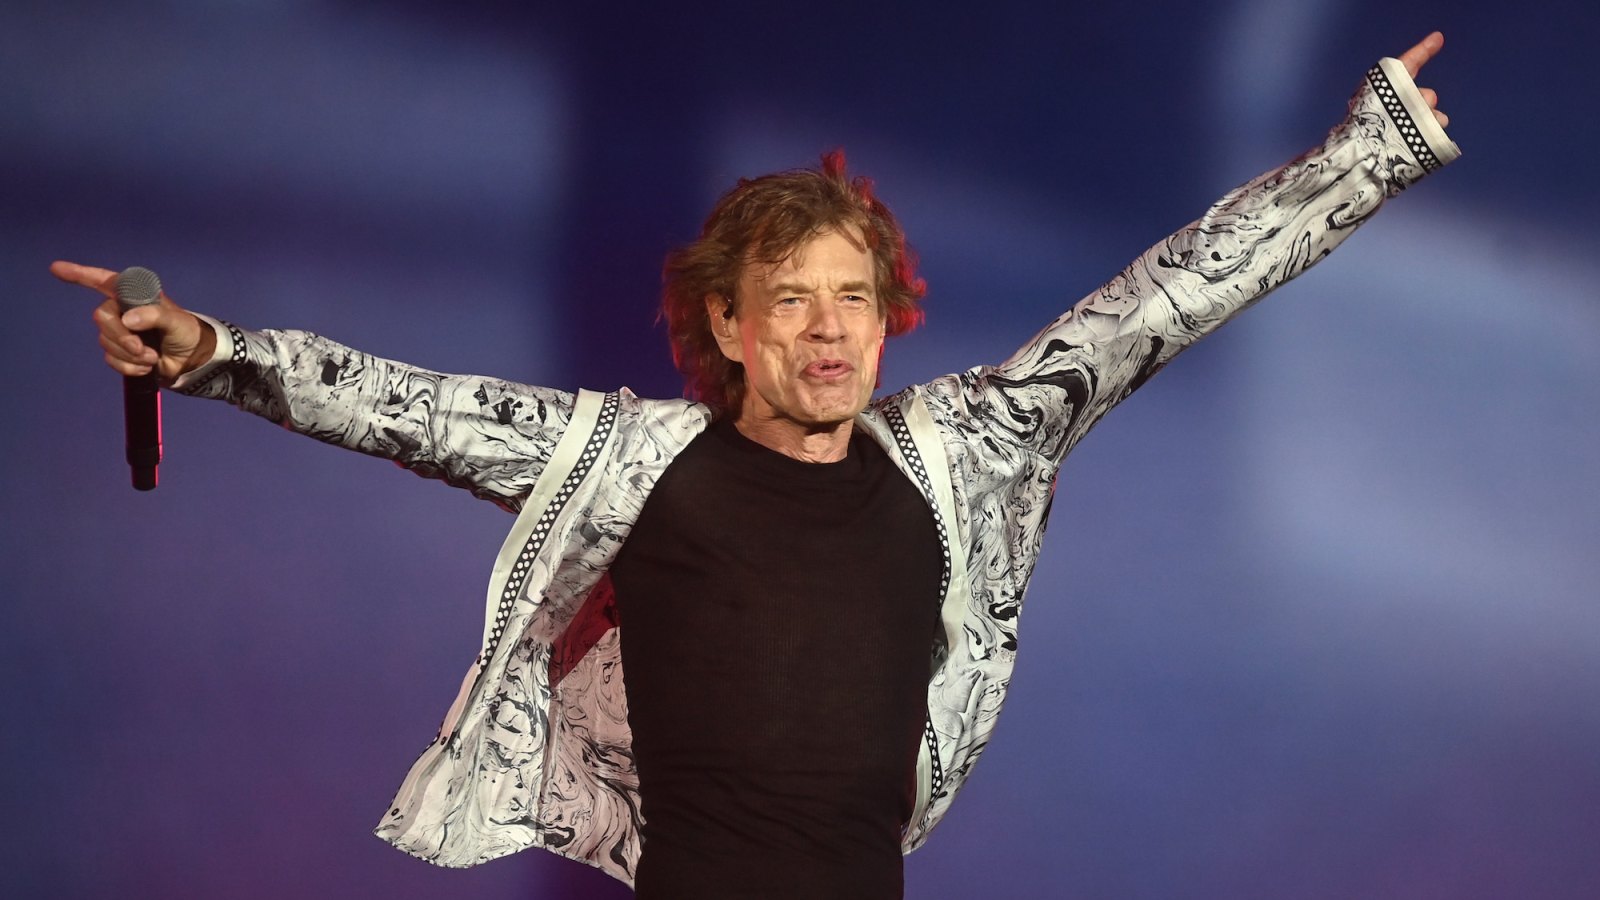 Mick Jagger Hints Leaving His Music Catalog to Charity Instead of Family